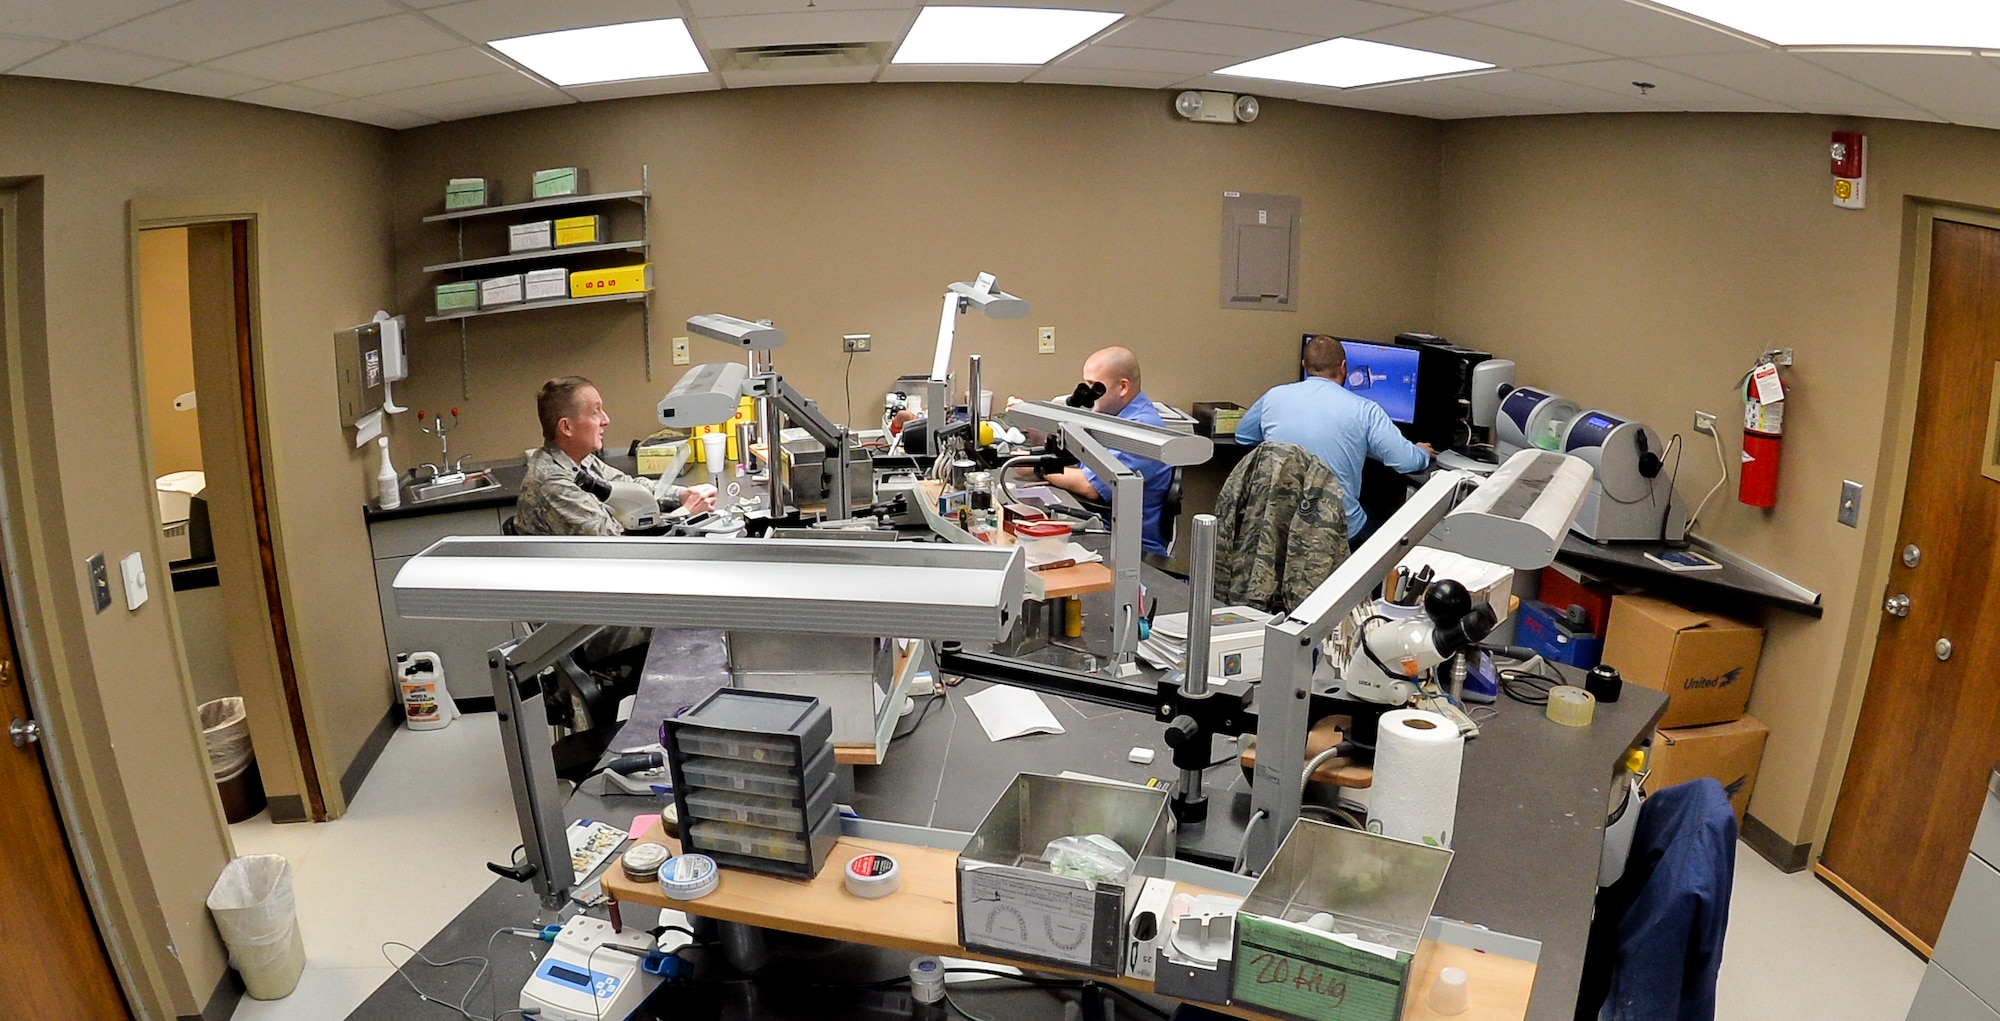 Dental laboratory technicians with the 2nd Dental Squadron process service requests at Barksdale Air Force Base, La., Feb. 12, 2016. The 2nd DS creates a variety of products including nightguards, retainers, crowns, bridges and implants to assist with dental care. (U.S. Air Force photo/Airman 1st Class Mozer O. Da Cunha)